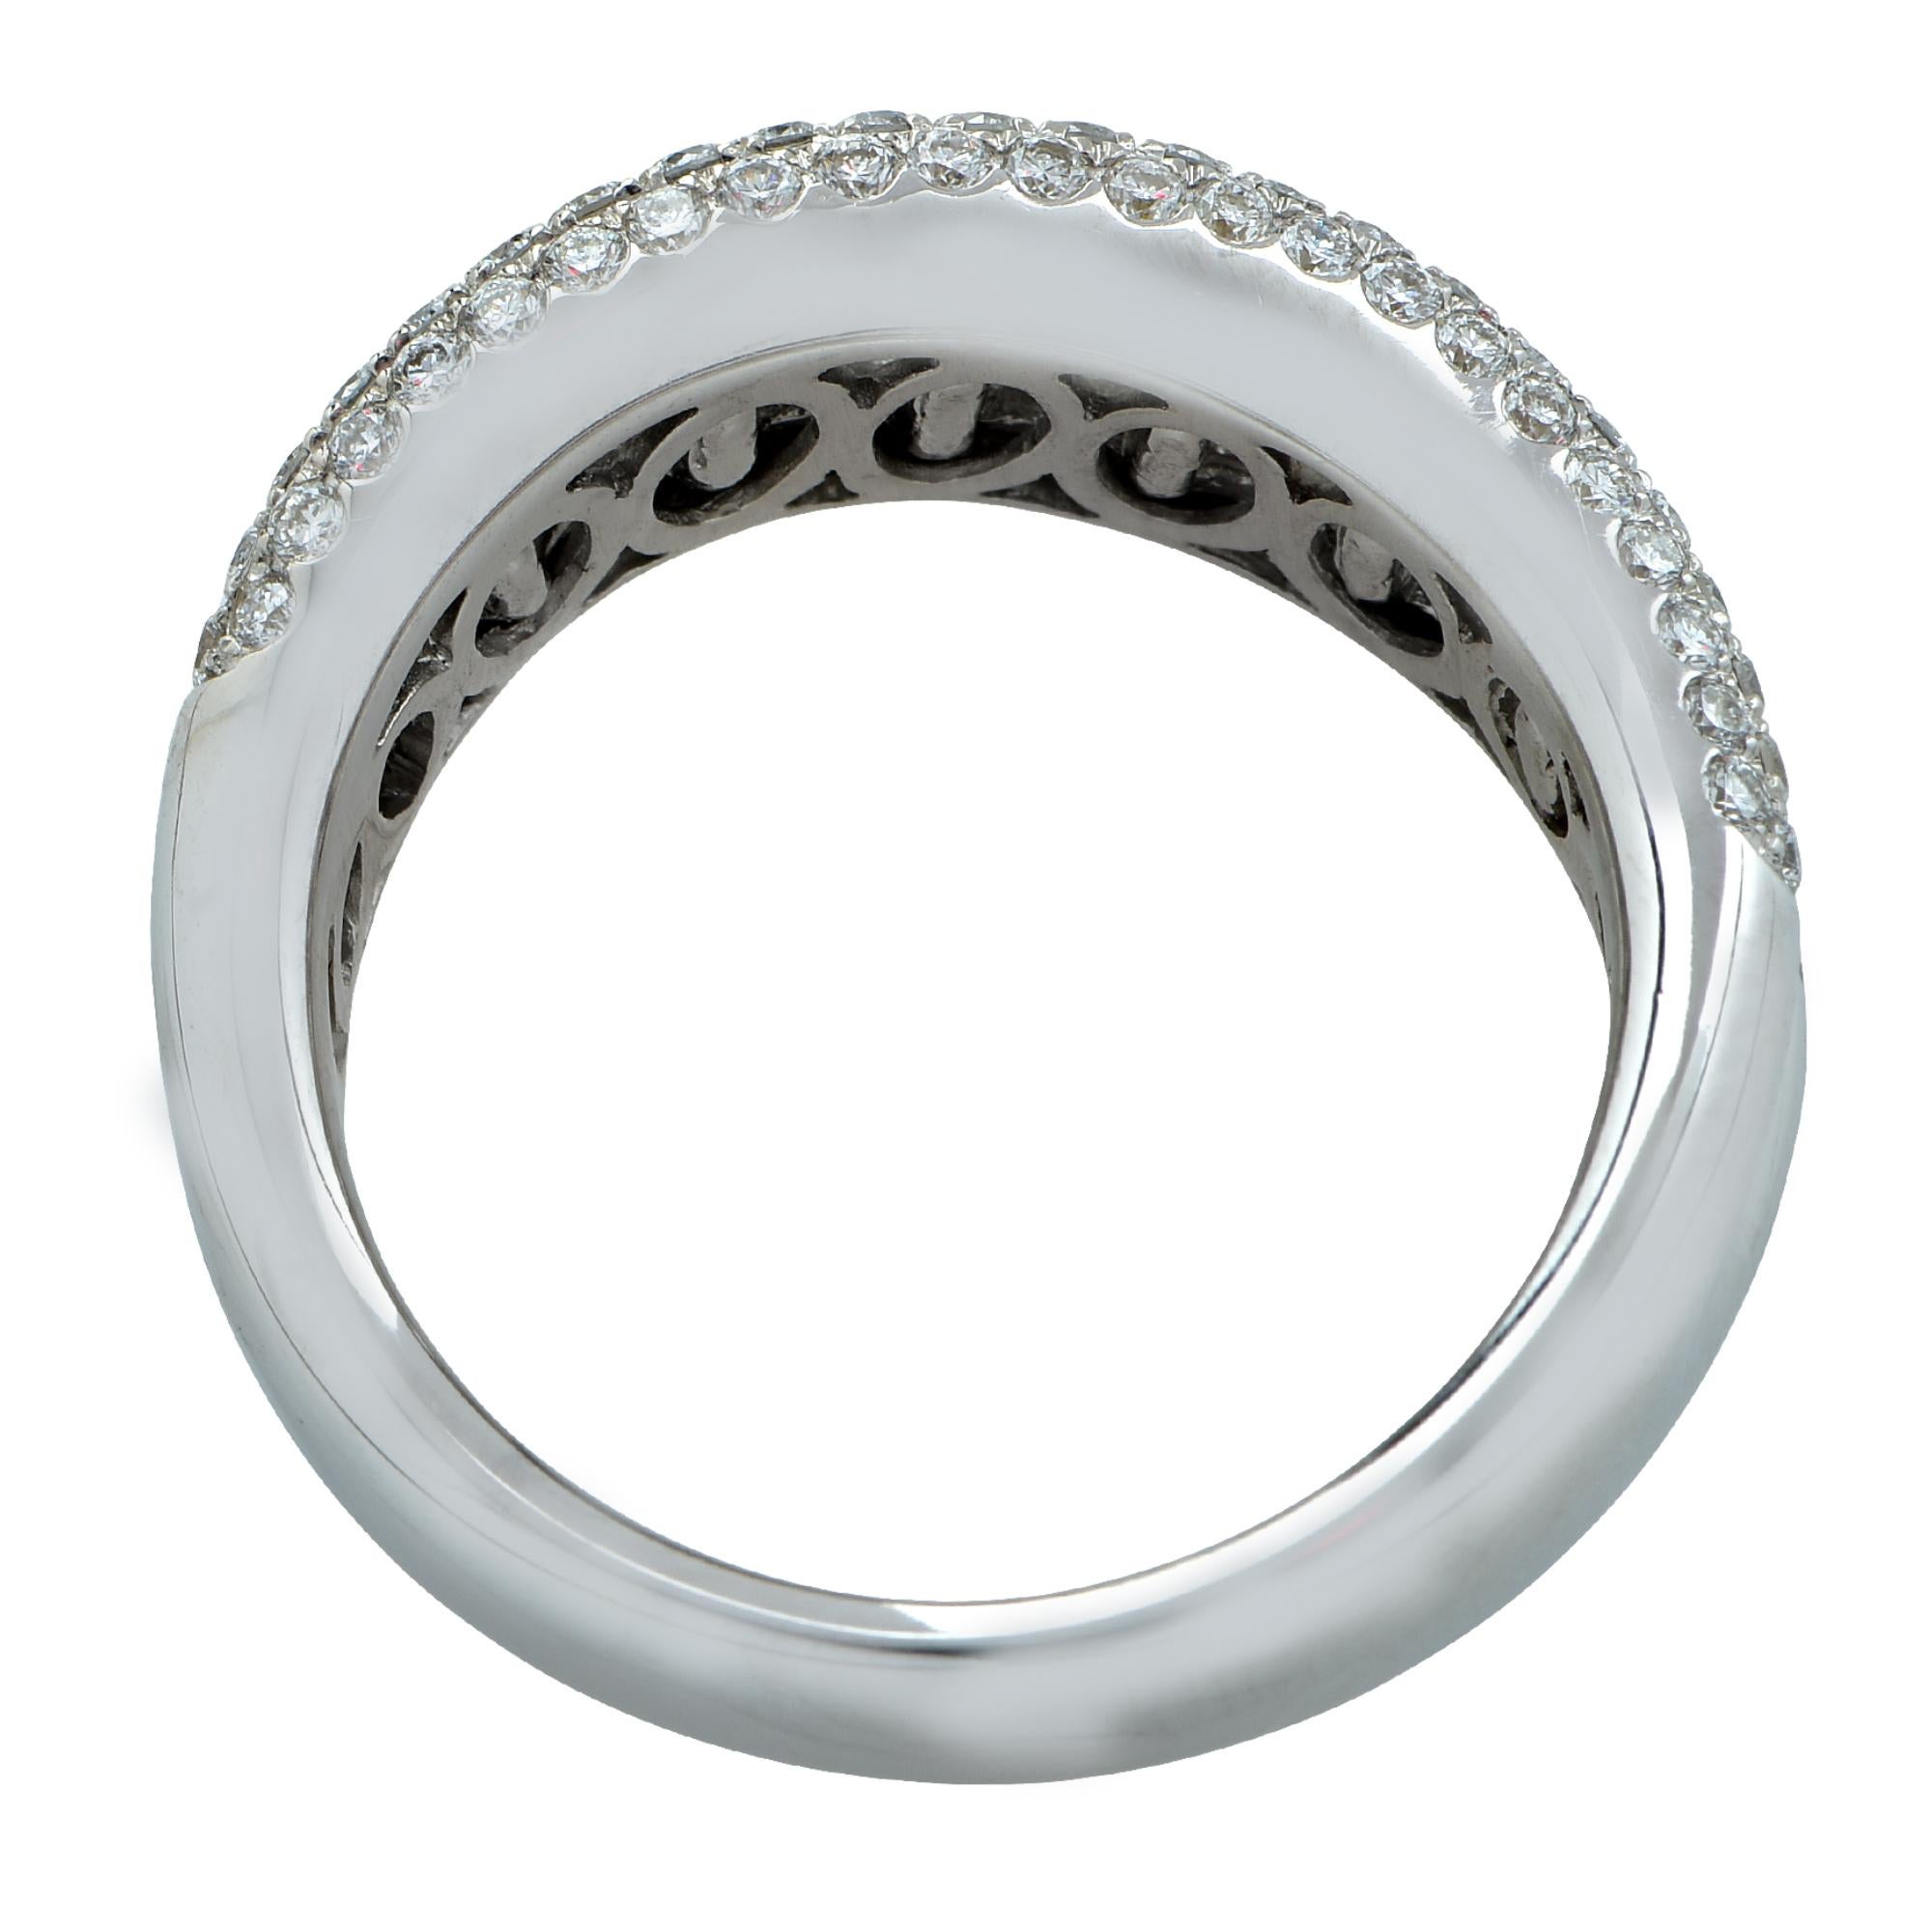 Stunning half eternity band featuring approximately 2.50cts  of mixed cut diamonds. This ring is adorned with 132 round brilliant diamonds, weighing approximately 1ct F-G color, VS clarity and 19 baguettes weighing approximately 1.50ct F-G color, VS